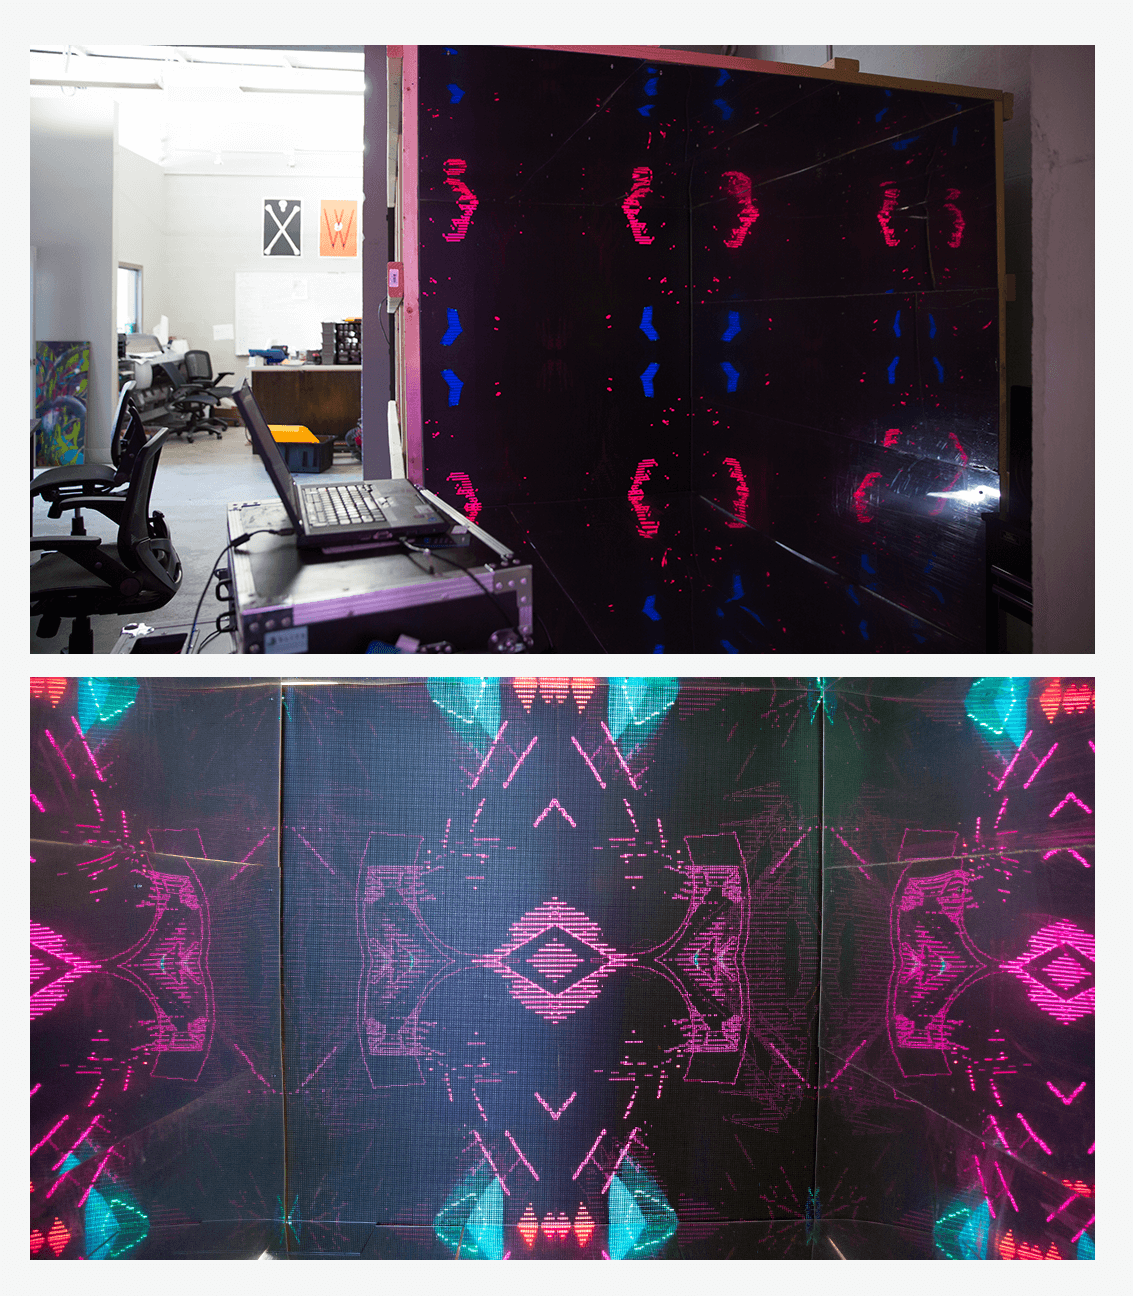 Progress photo of the Infinity Mirror art installation at ST8MNT Brand Agency for the Bonnaroo Music & Arts Festival in Manchester, Tennessee